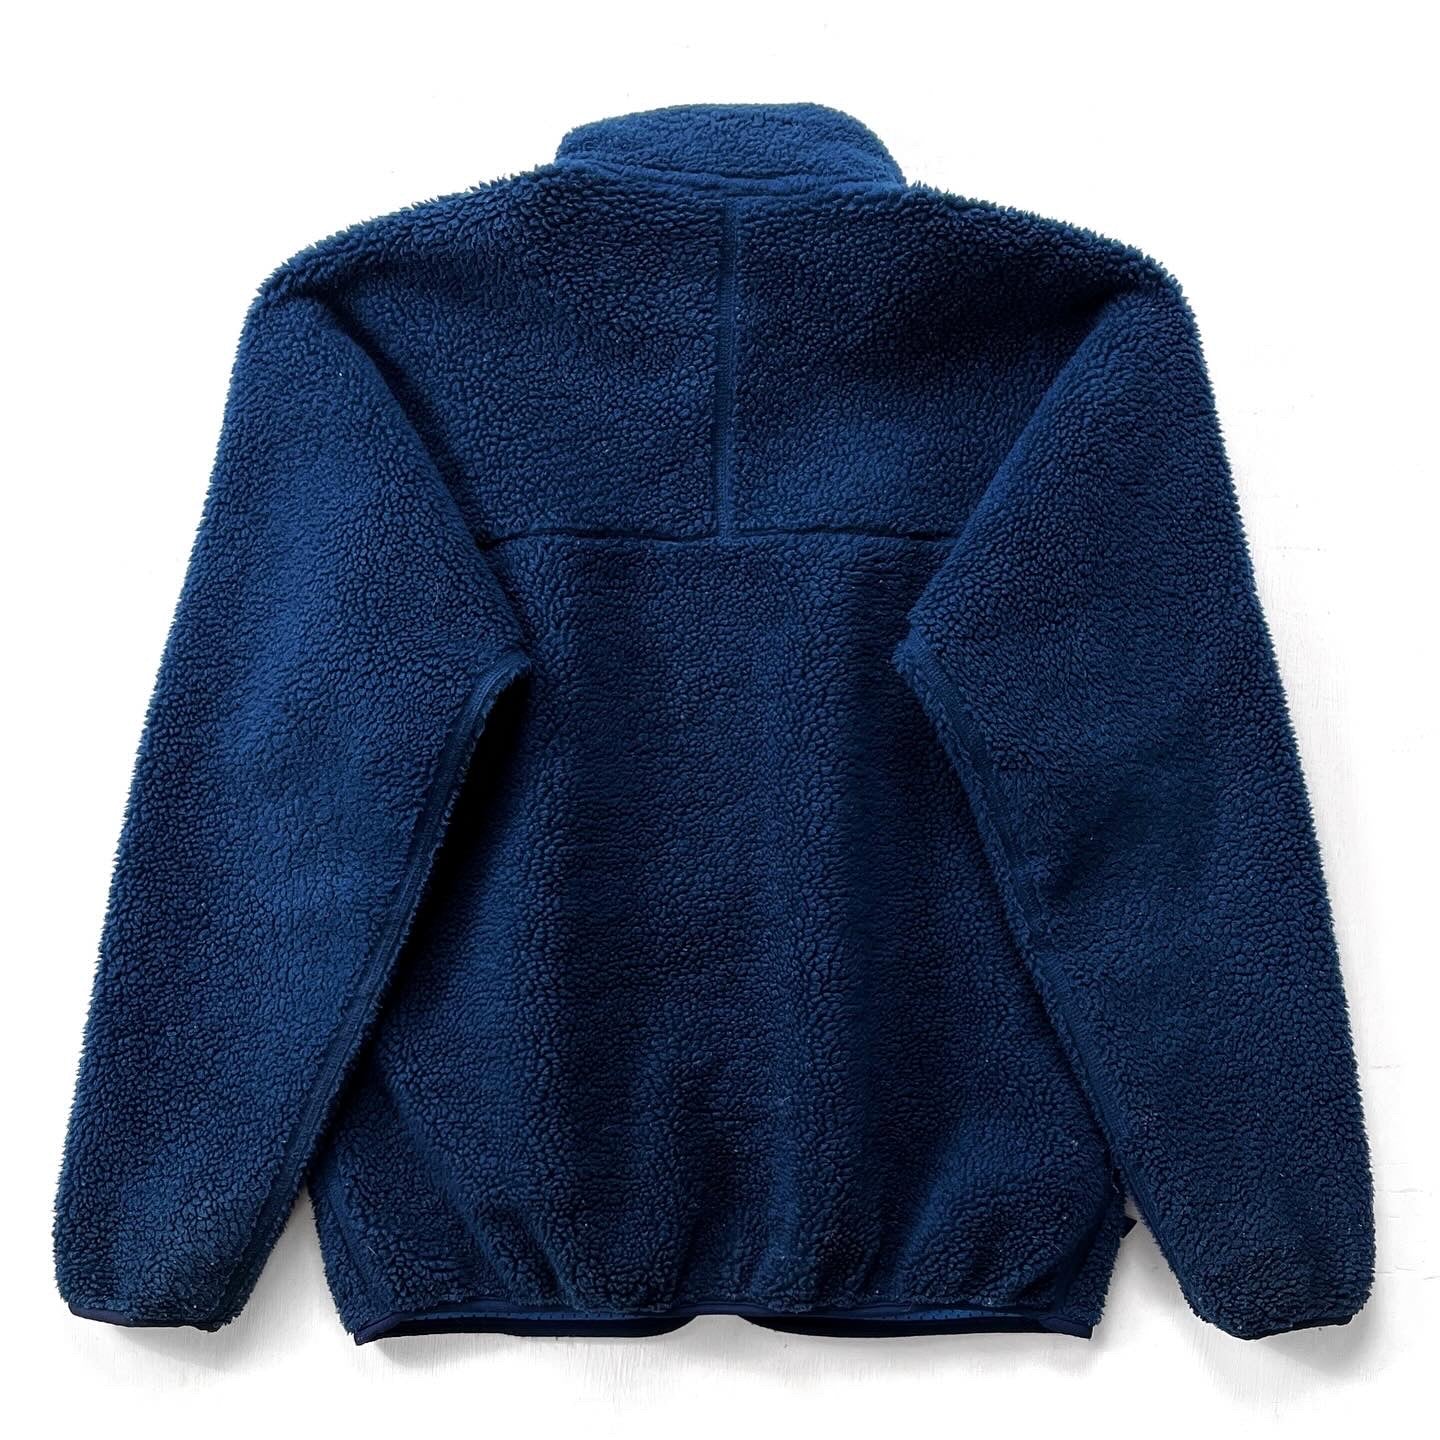 1995 Patagonia Made In The U.S.A. Retro Pile Cardigan, Navy (S/M)